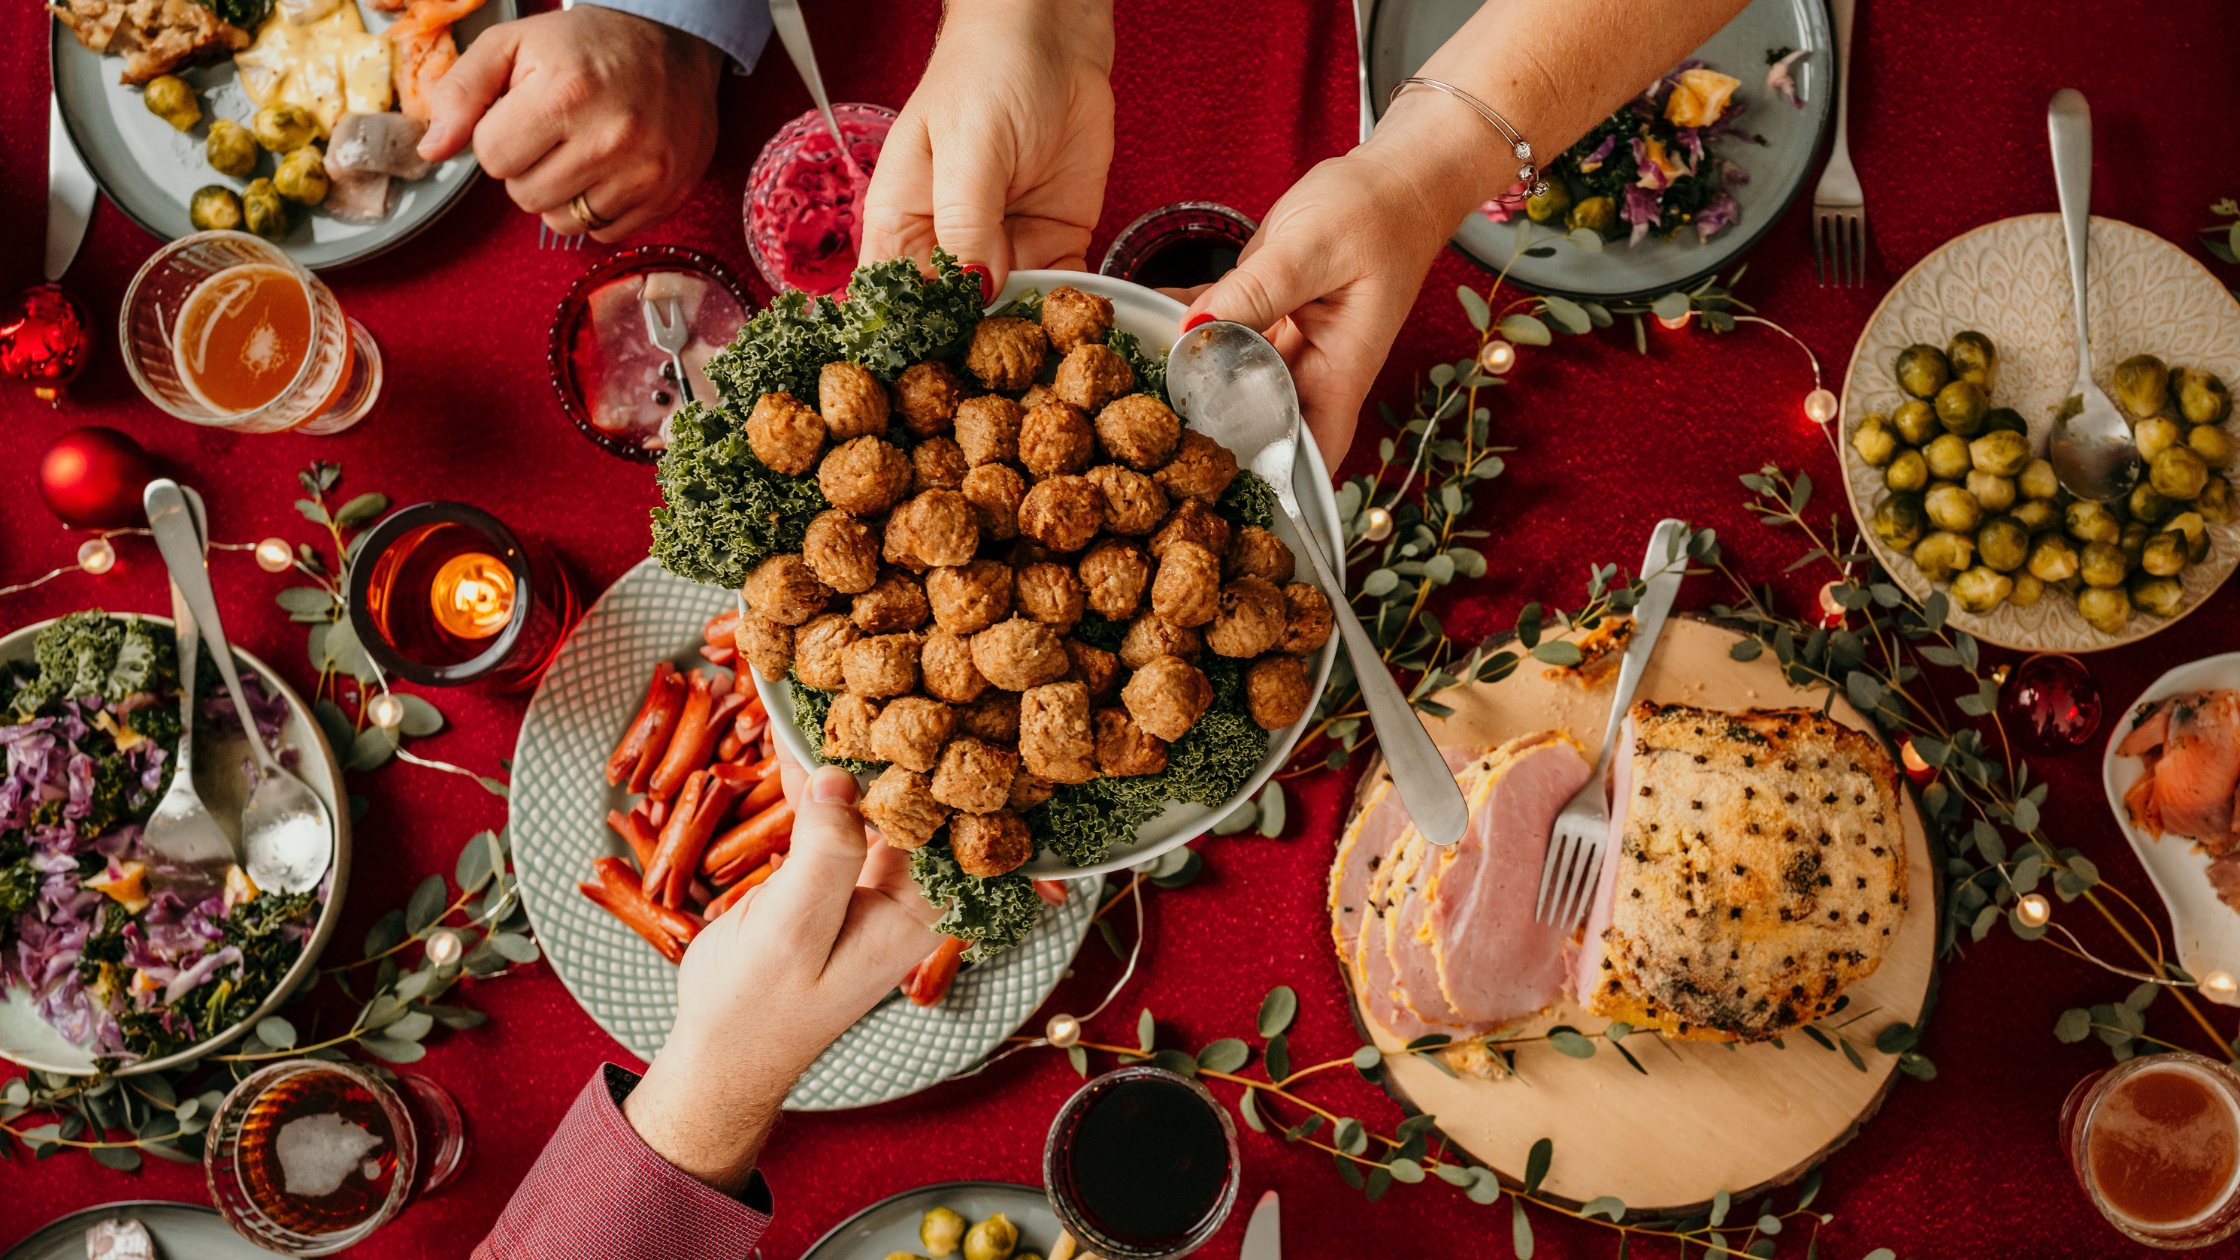 Heart Healthy Christmas Meals